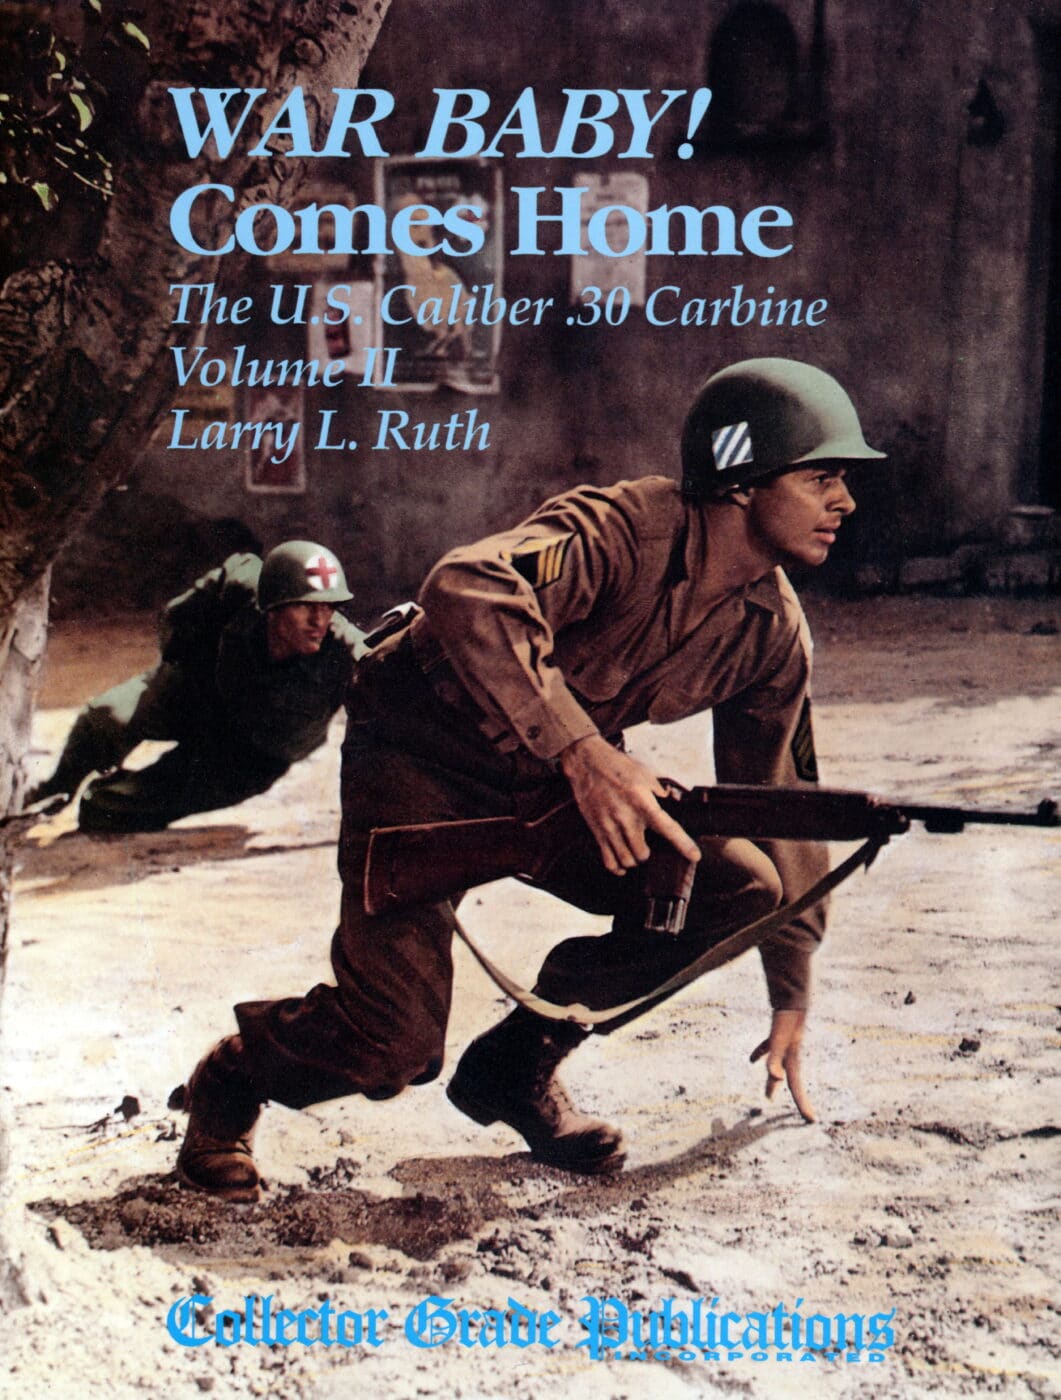 Cover of War Baby! Comes Home Volume II by Larry Ruth